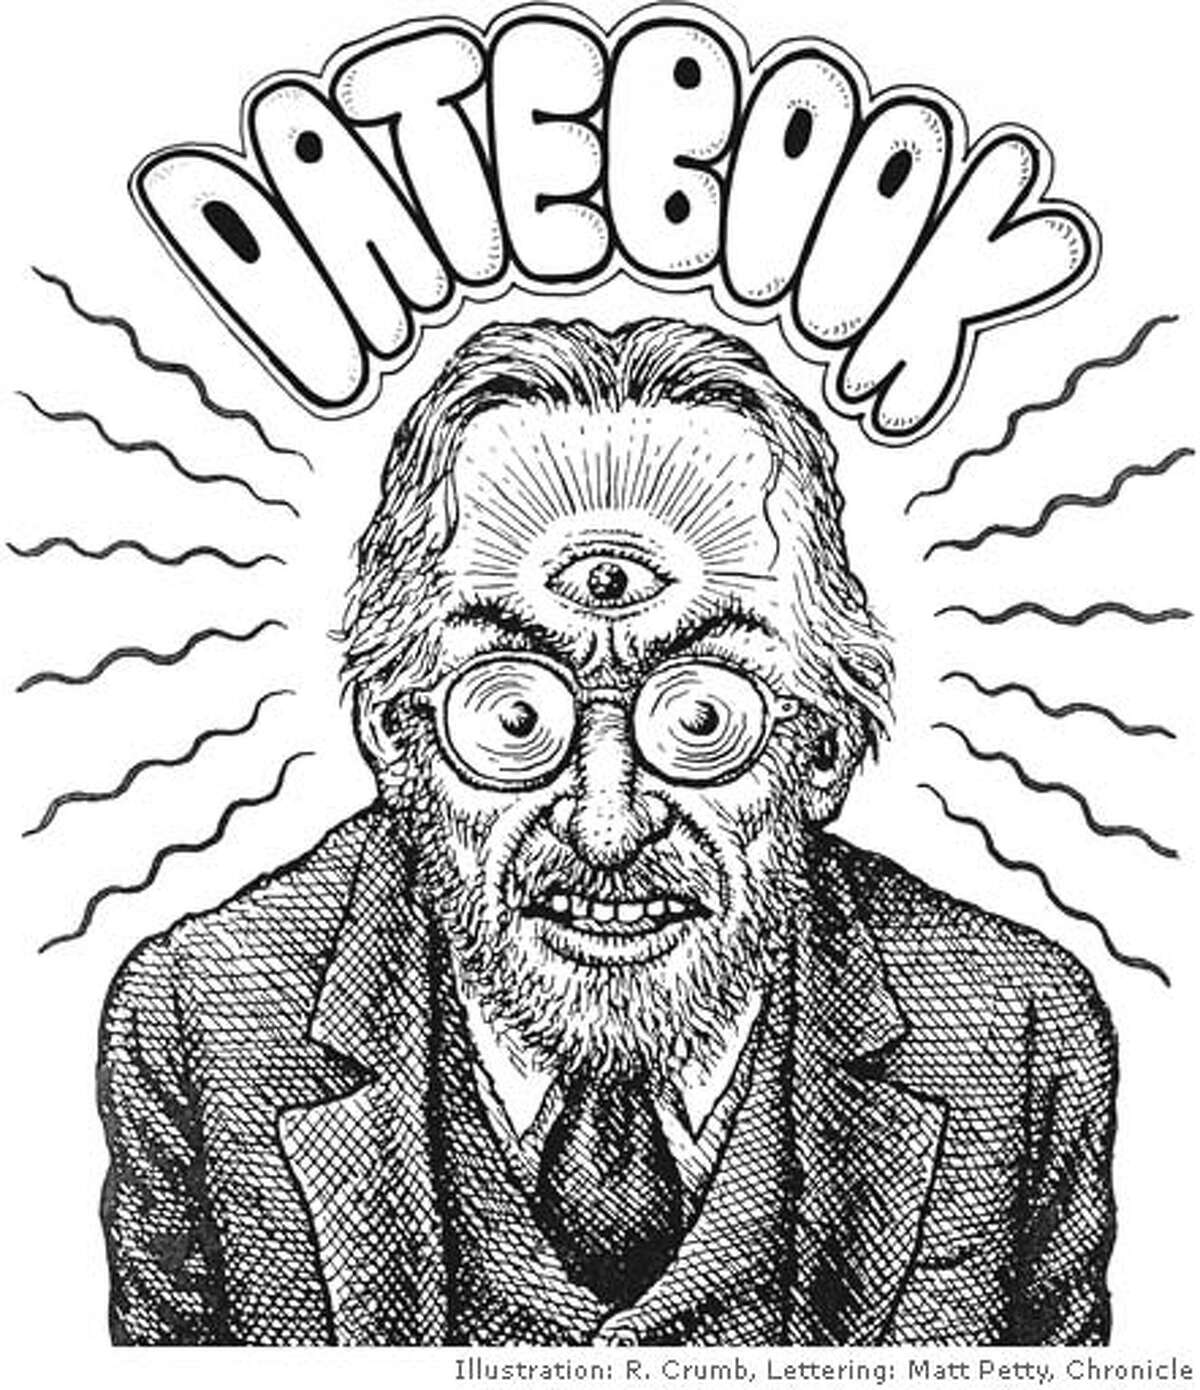 Sunday Datebook Cover: R. Crumb self-portrait. Lettering by Matt Petty, the Chronicle (with apologies to R. Crumb)